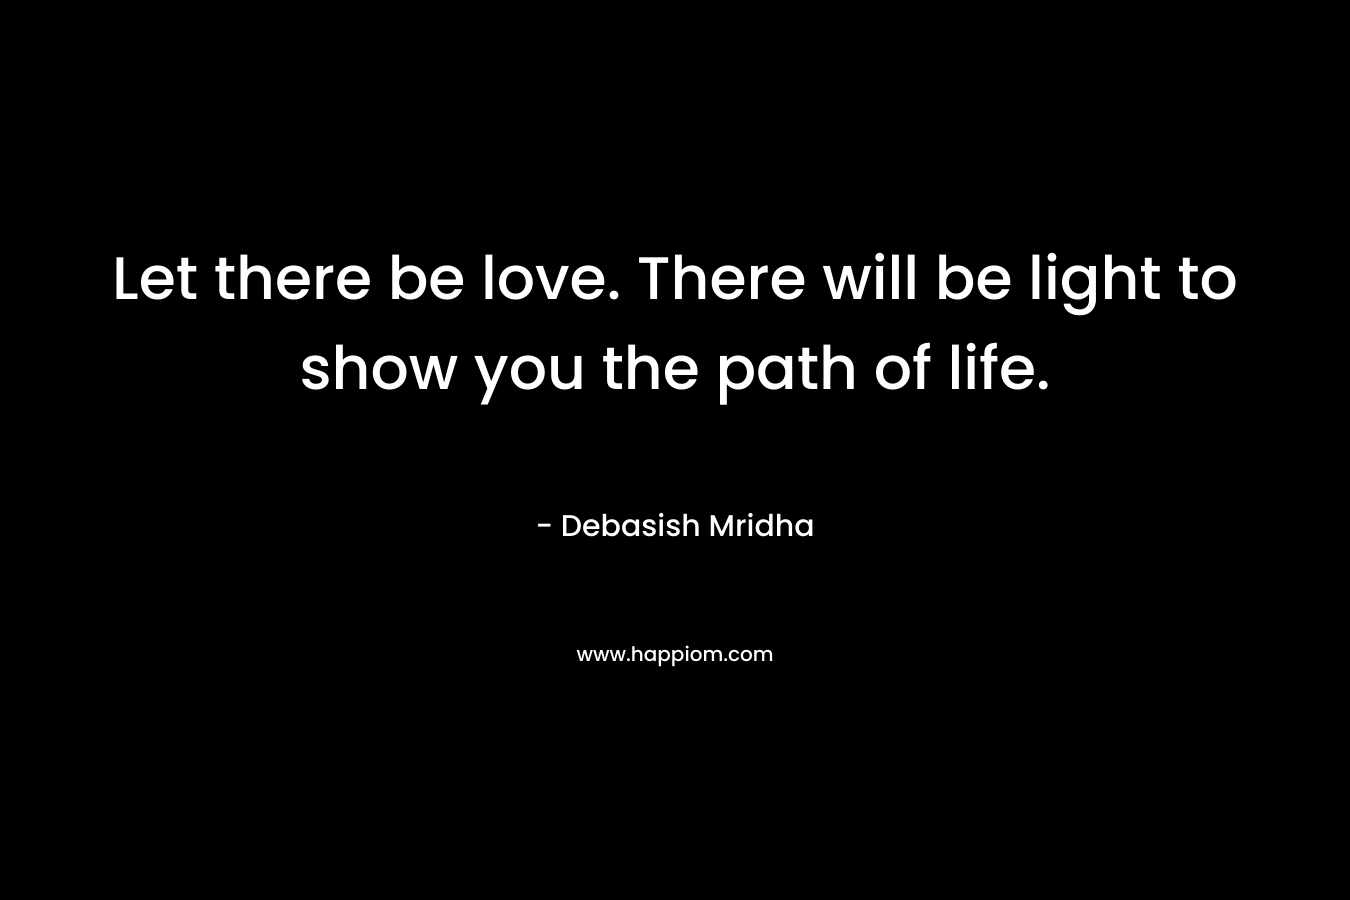 Let there be love. There will be light to show you the path of life.